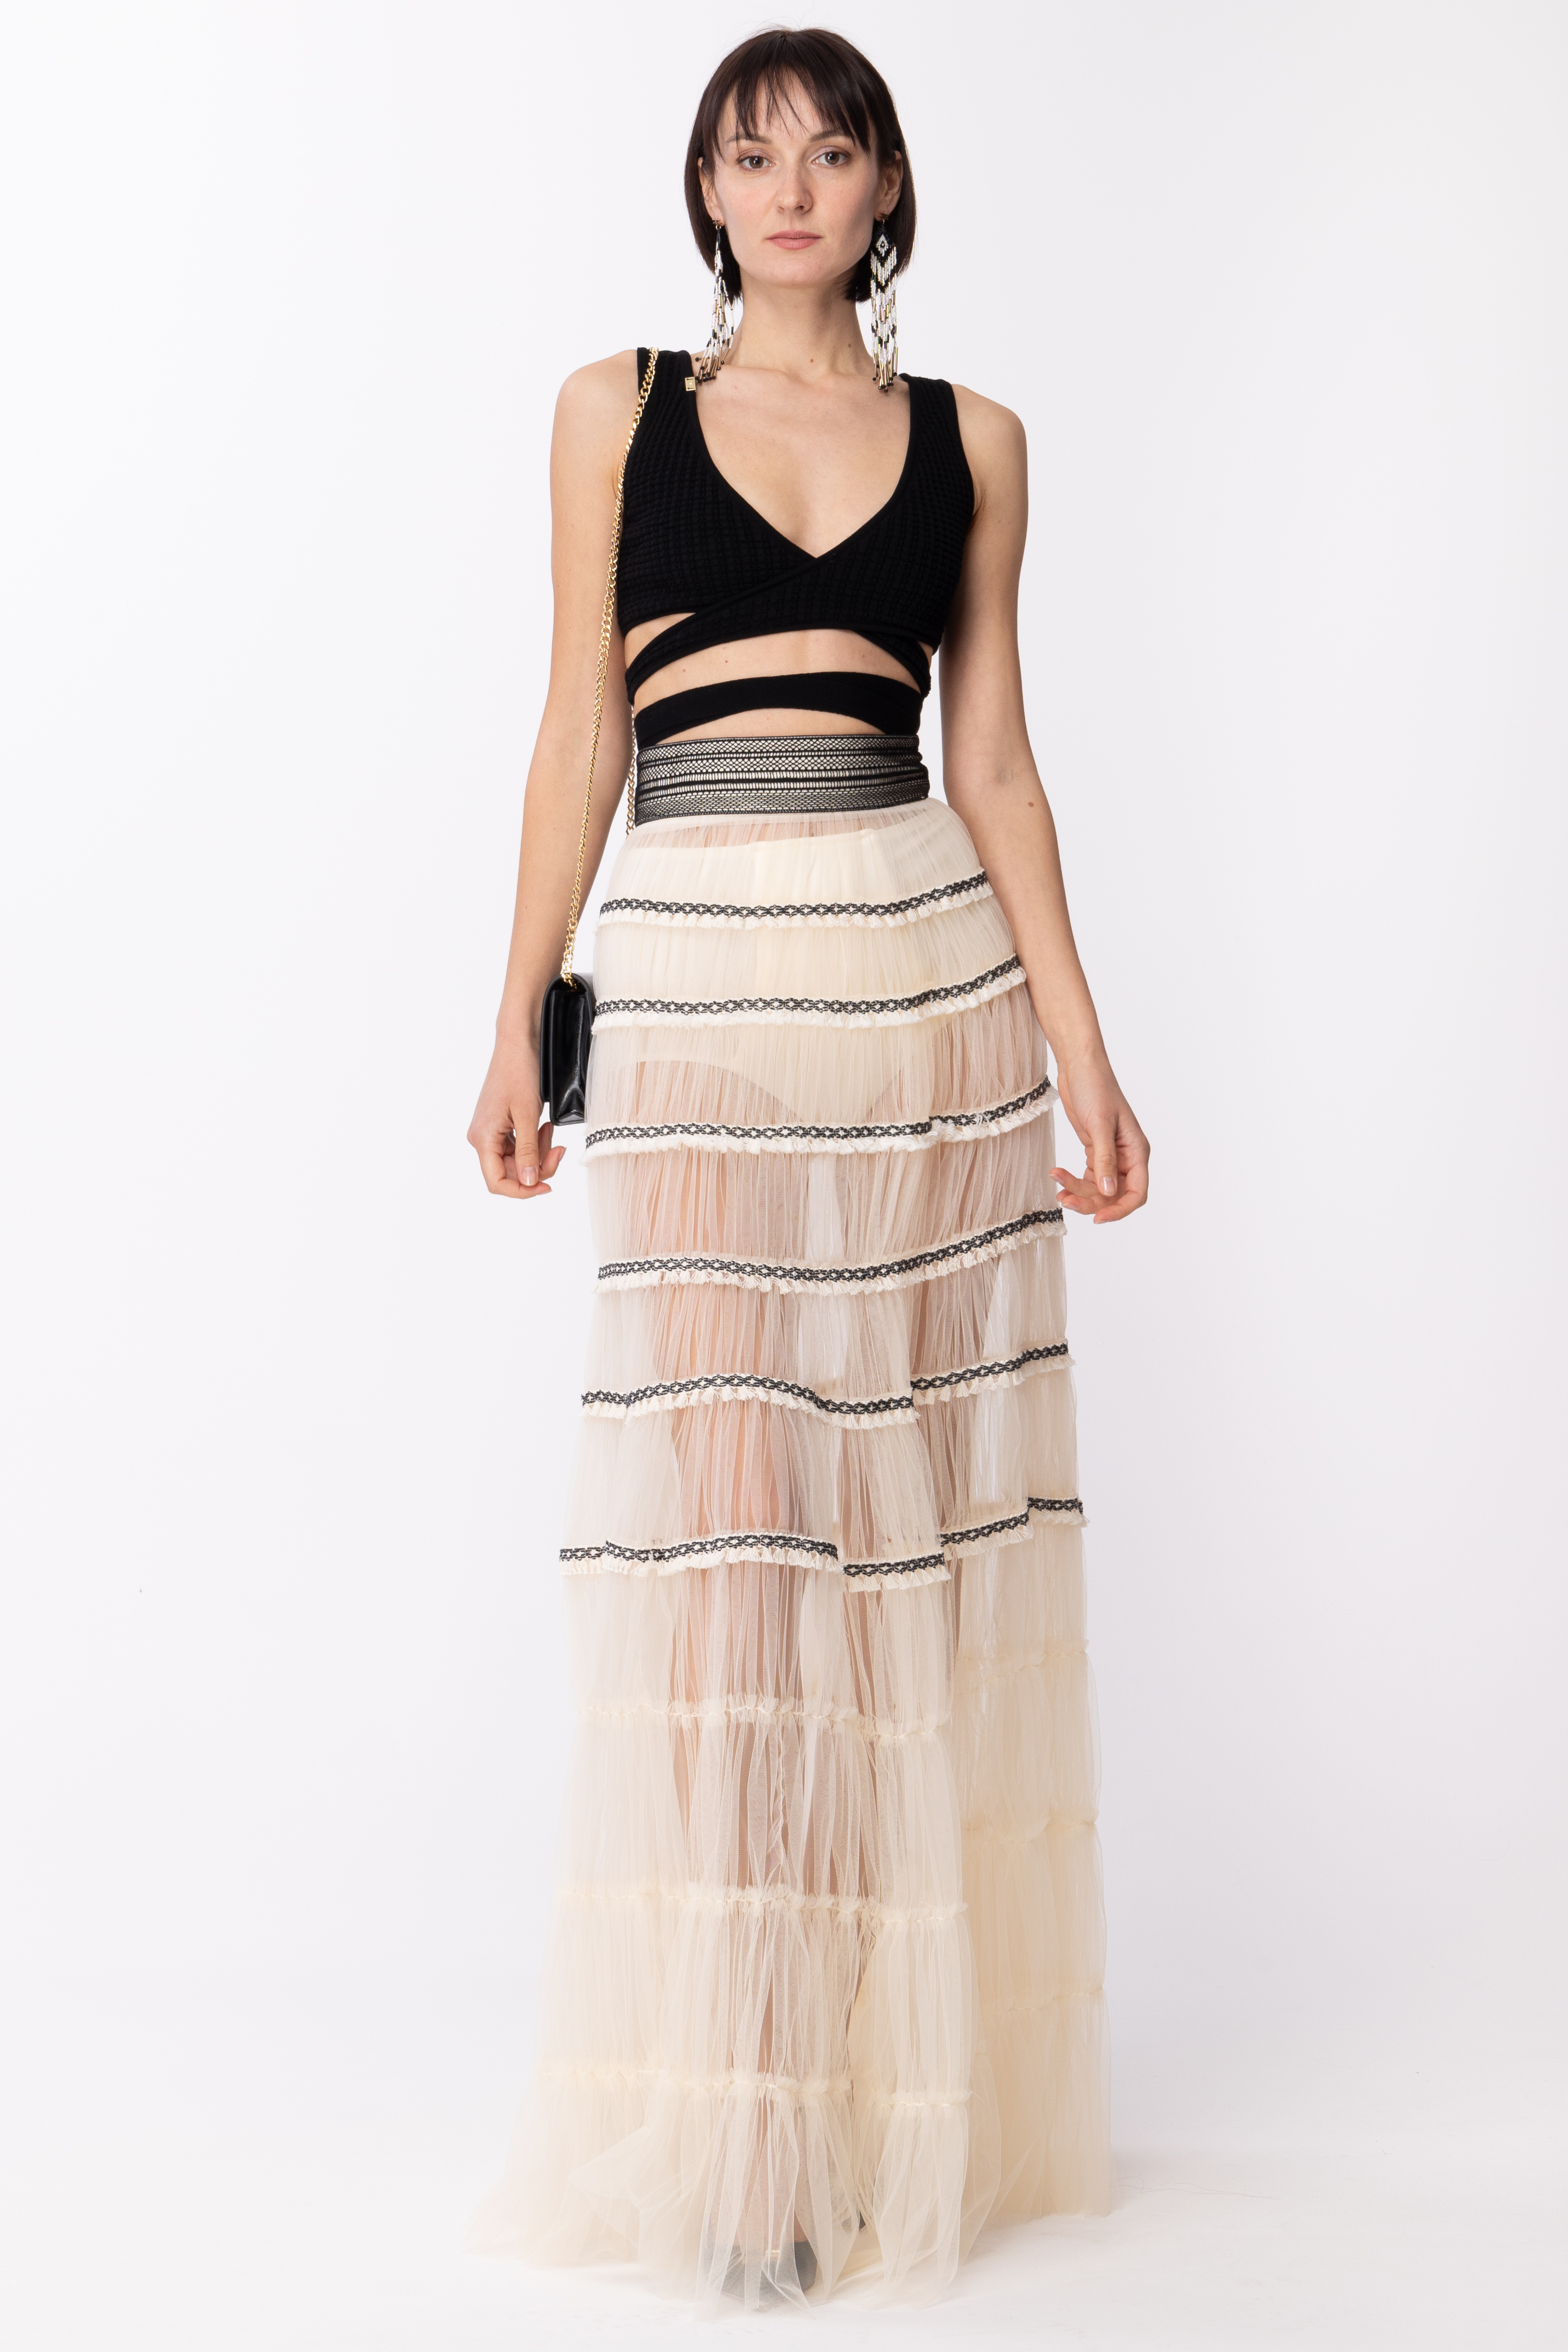 Preview: Elisabetta Franchi Skirt with flounces and patterns in Jour Burro/Nero